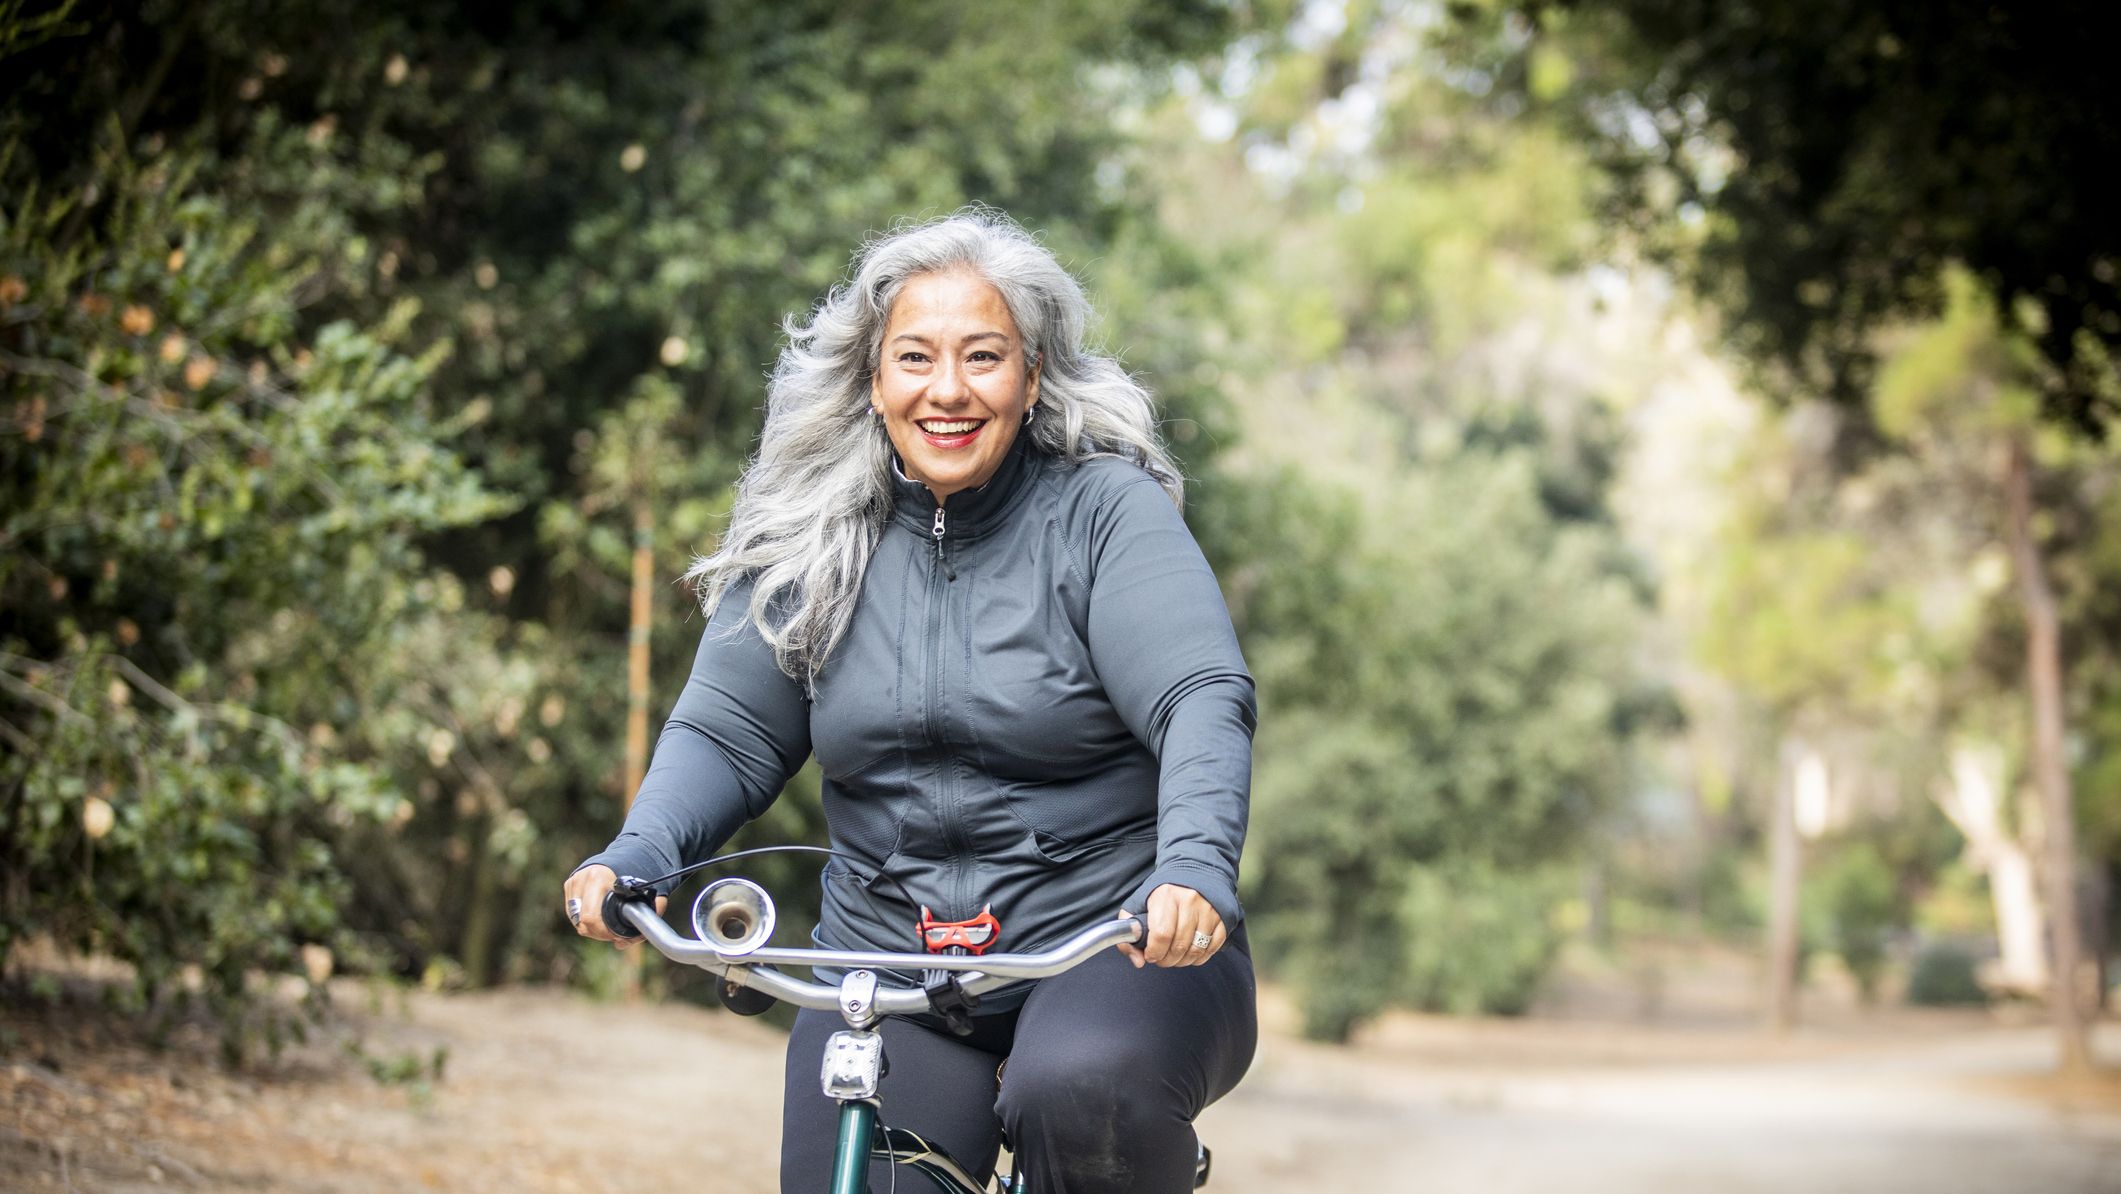 https://hips.hearstapps.com/hmg-prod/images/senior-mexican-woman-riding-bicycle-royalty-free-image-1598632602.jpg?crop=1xw:0.84415xh;center,top